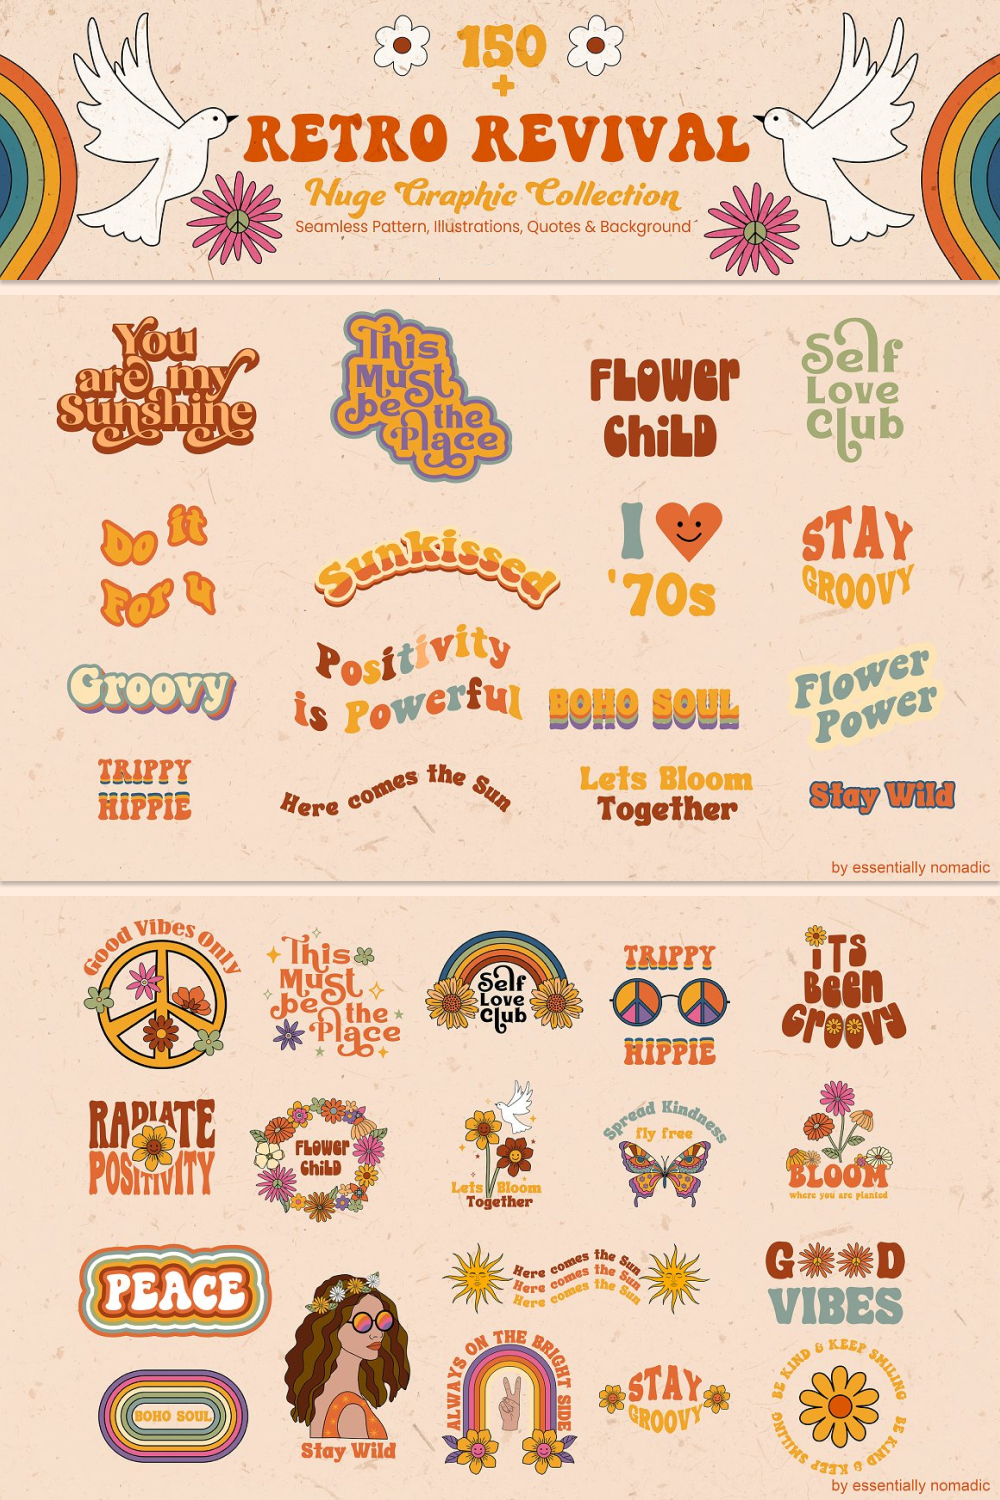 Retro revival 70s graphic collection of pinterest.